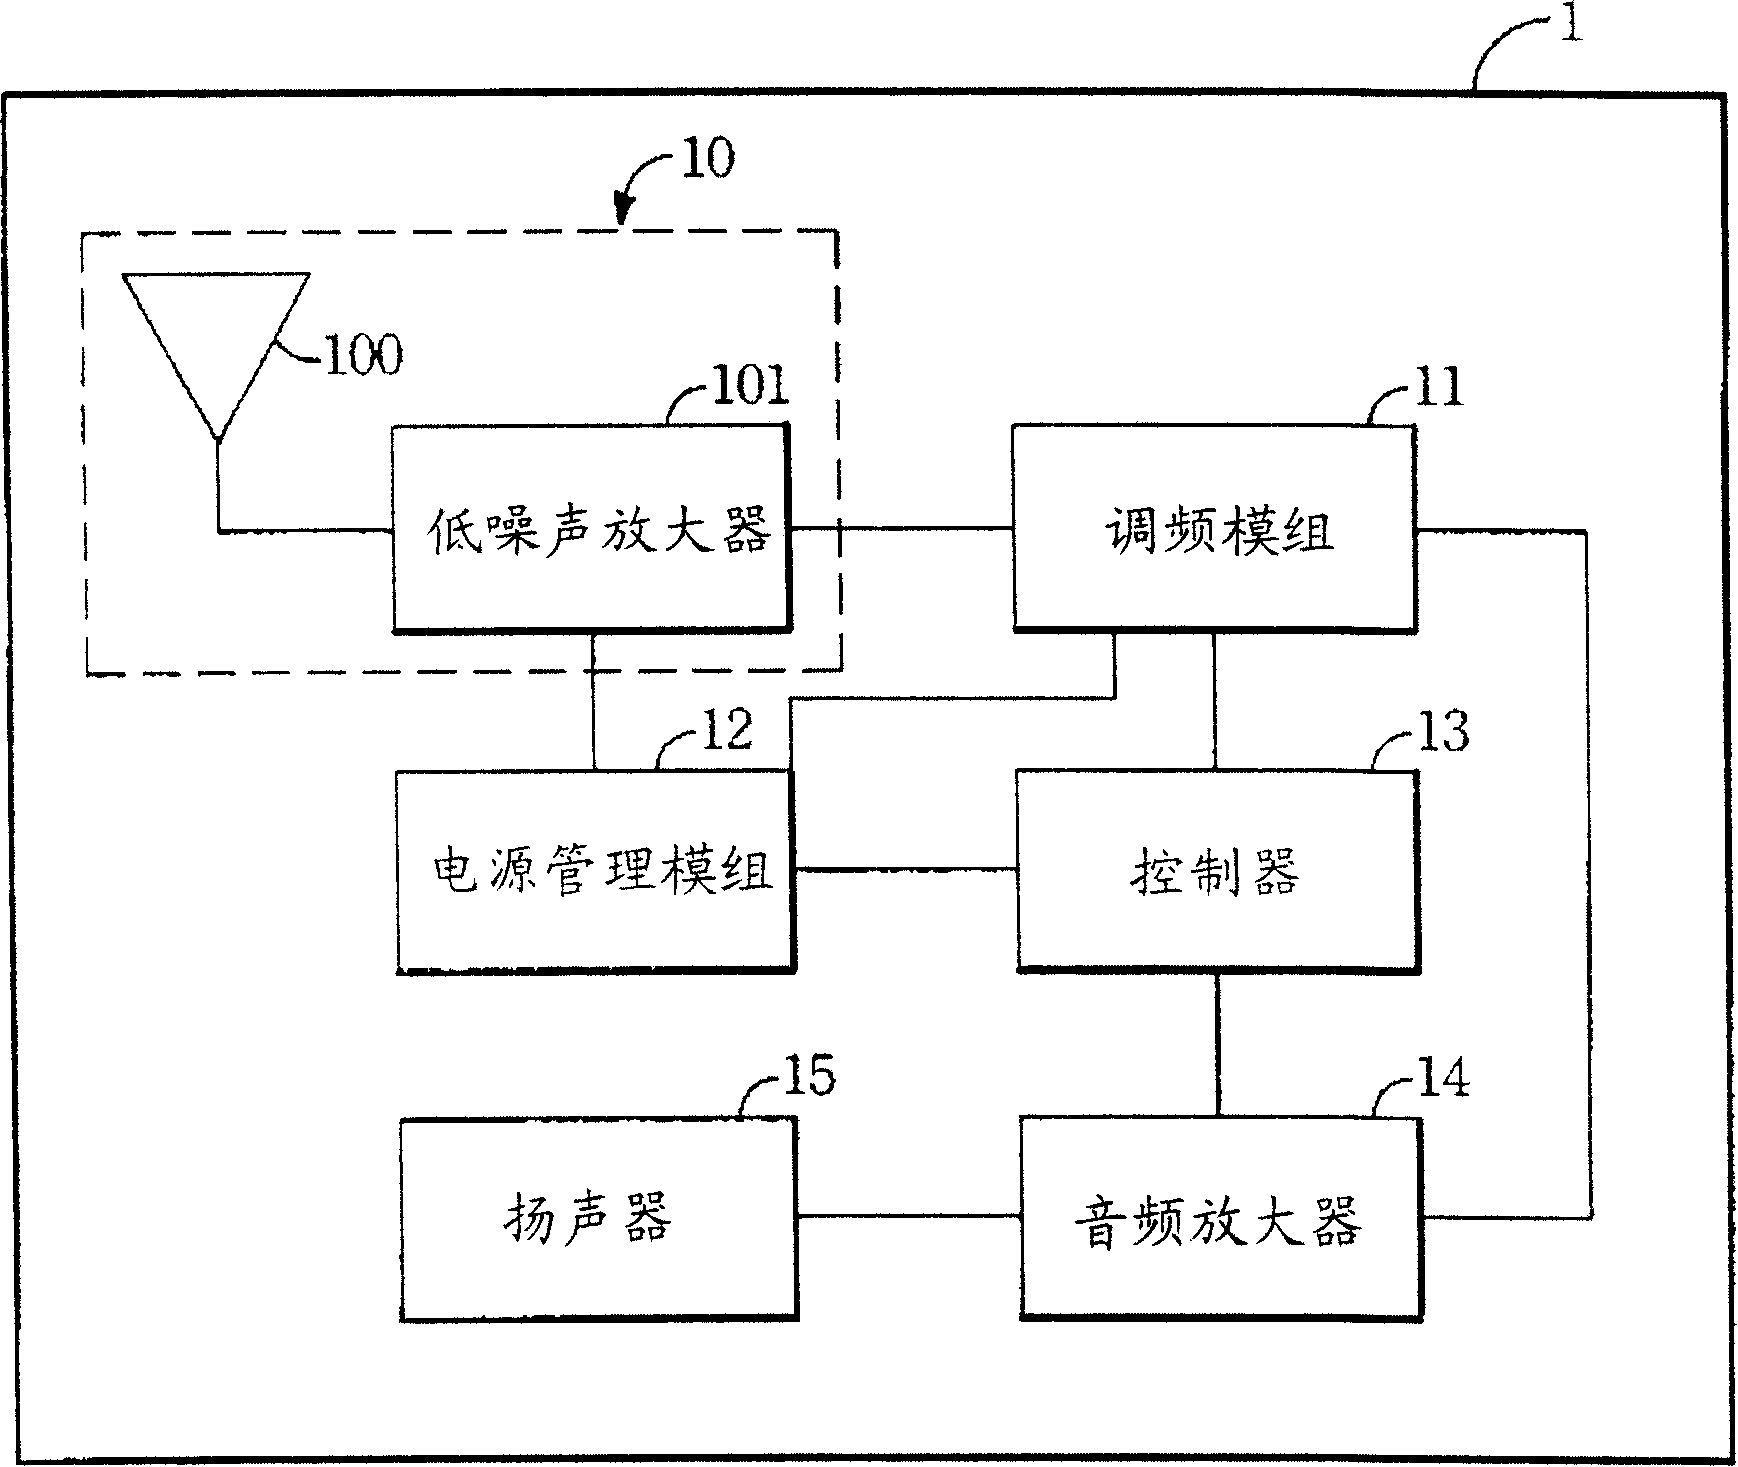 Frequency modulation system circuit